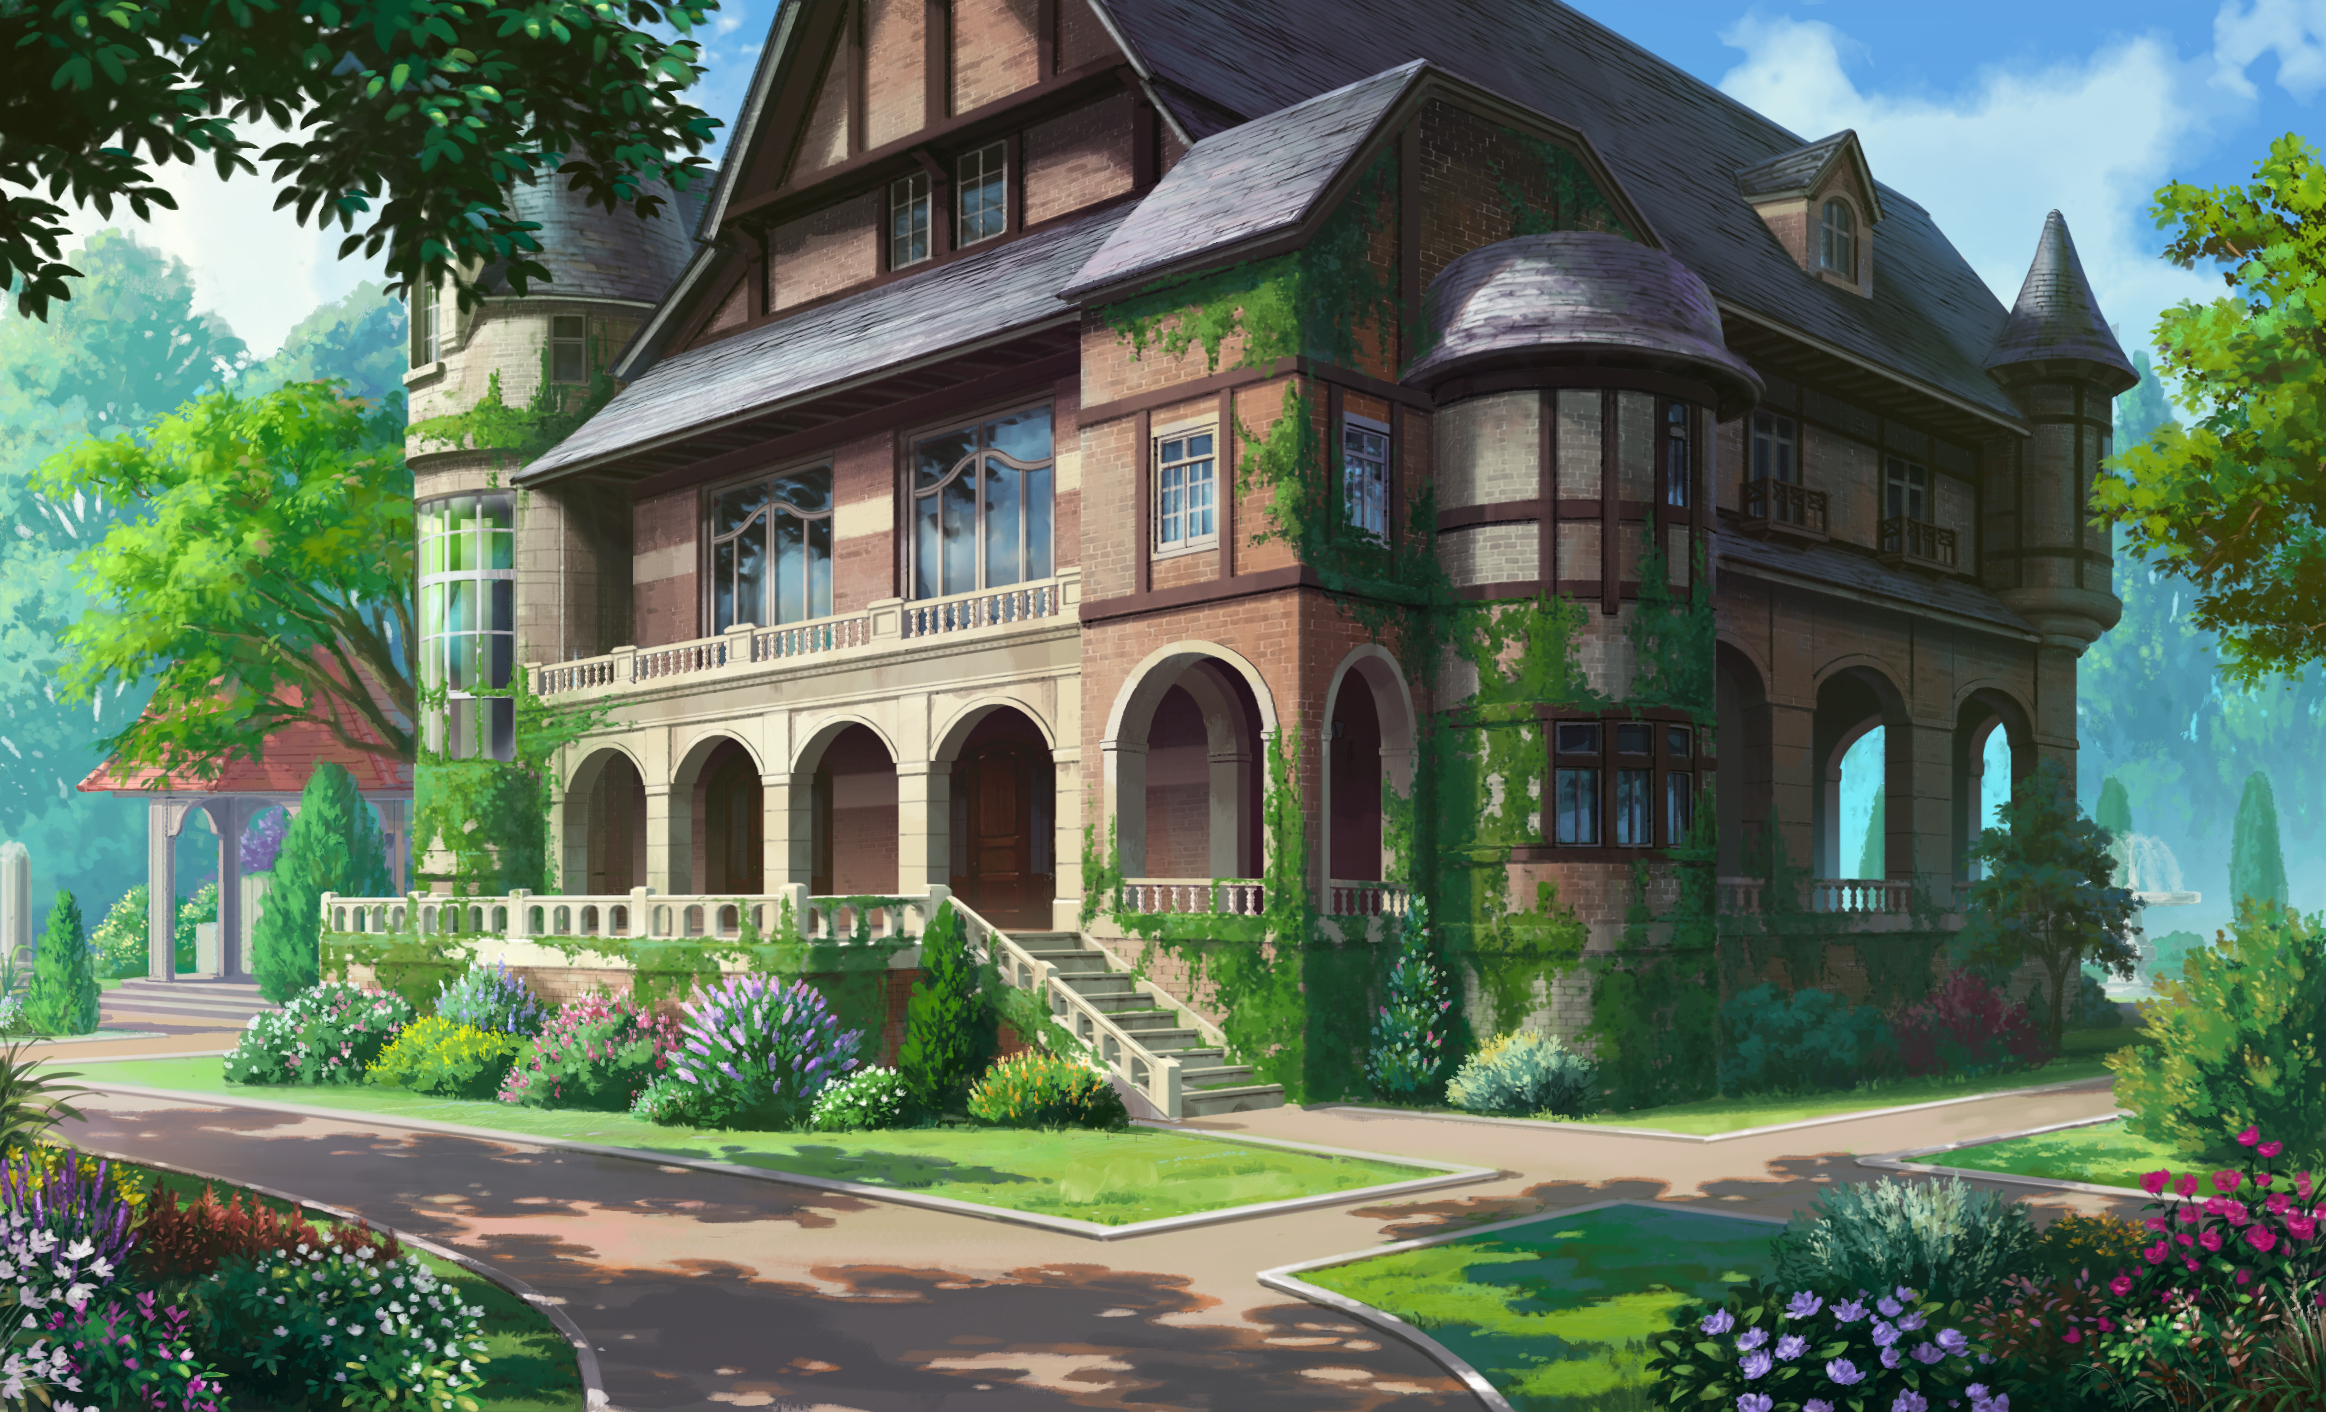 Hello! I'm currently building the Phantomhive Manor from an anime and manga  called Black Butler. Here's what I've done so far. What do you think? I'm  pretty proud of how it turned